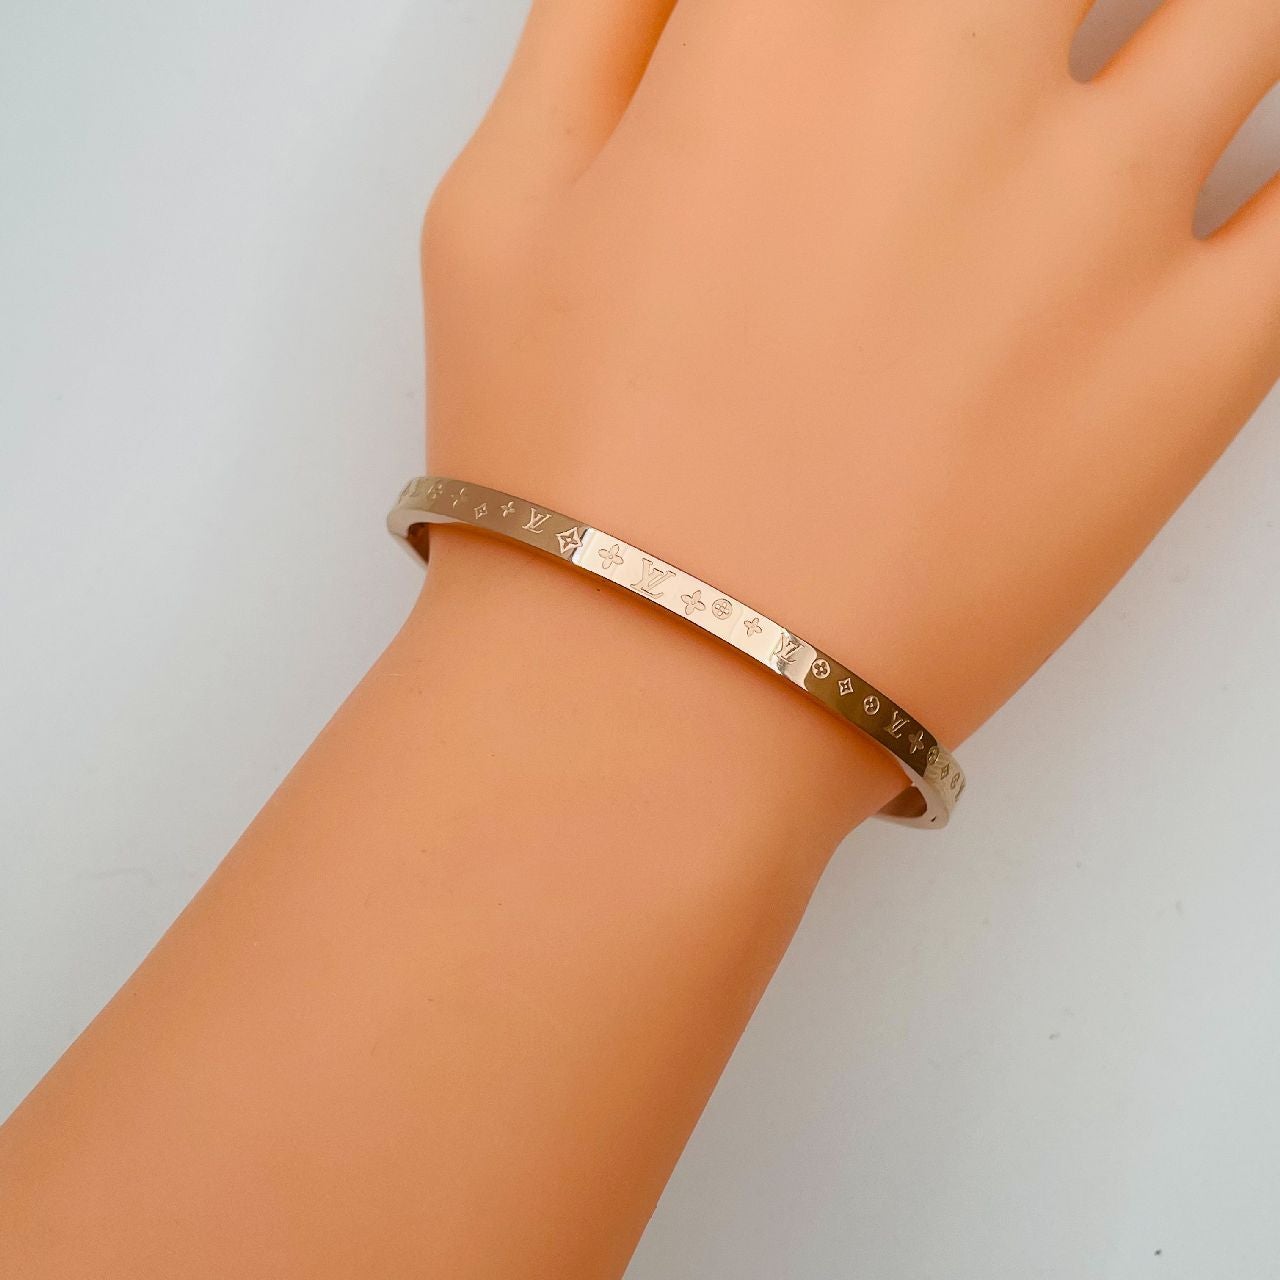 Women's Trendy Slim 3mm Cuff Bracelets Bangle, Gold Color Stainless Steel Bangle  Stylish Twisted Rope Wristband Gift To Girls - AliExpress